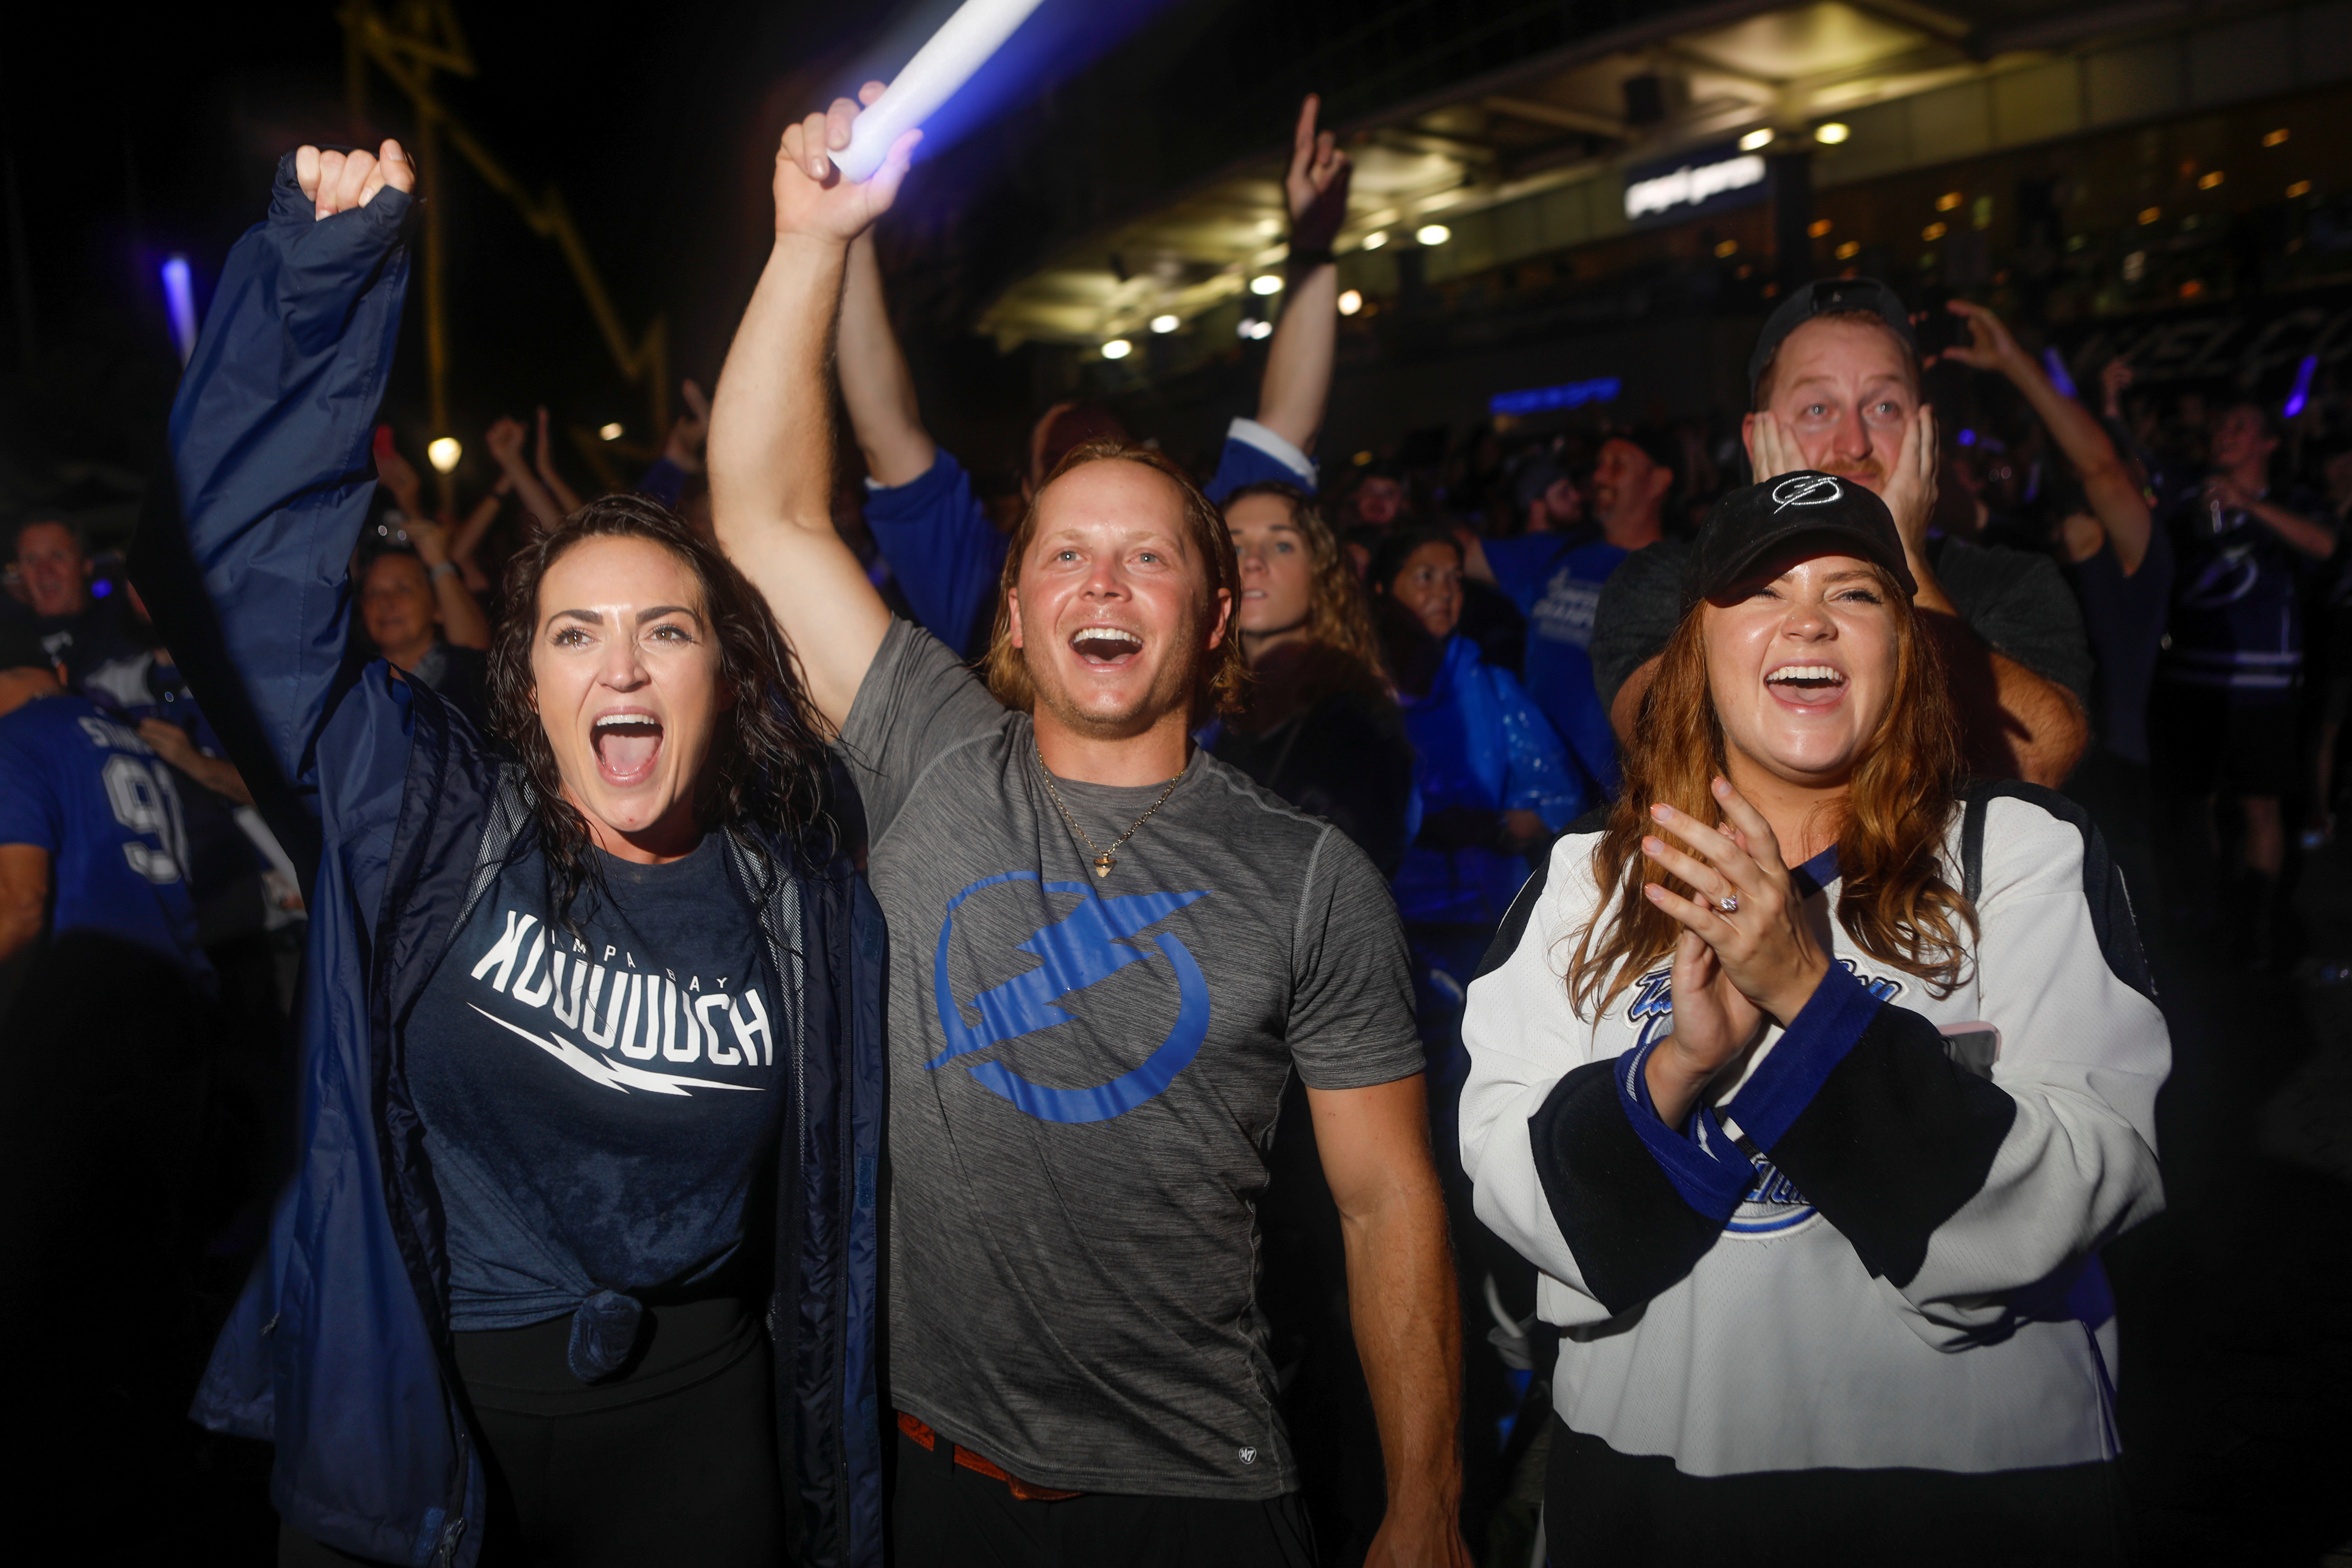 Stanley Cup Finals gear: Tampa Bay Lightning and Montreal